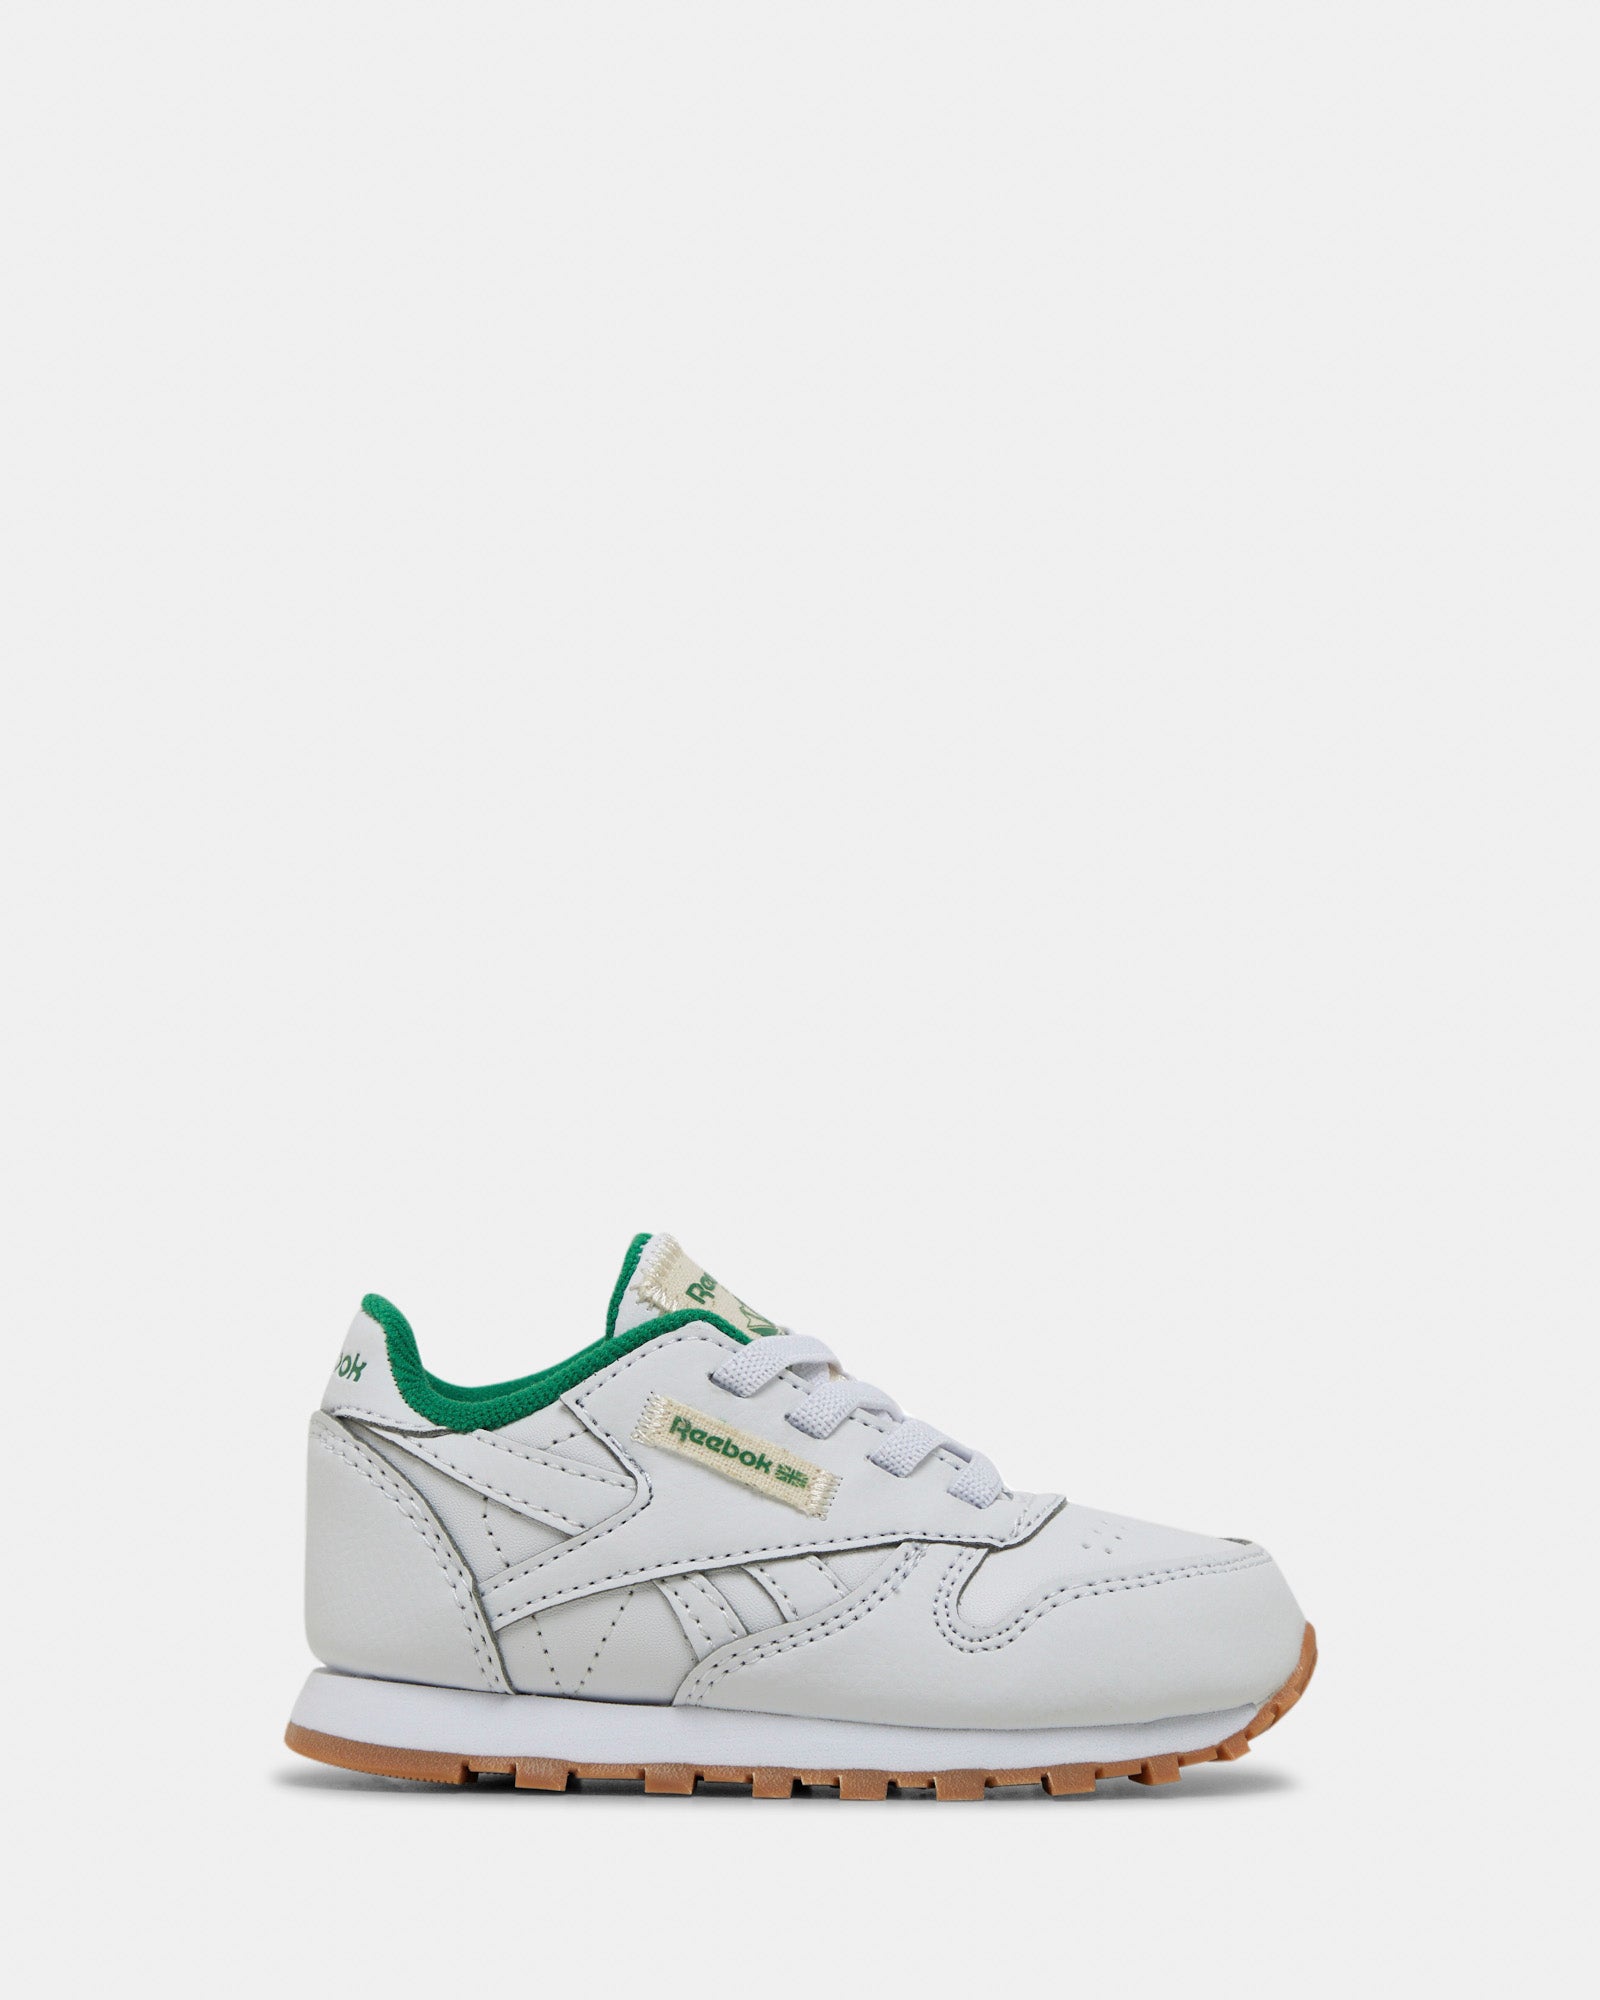 Classic Leather Shoes White/White/Glen Green